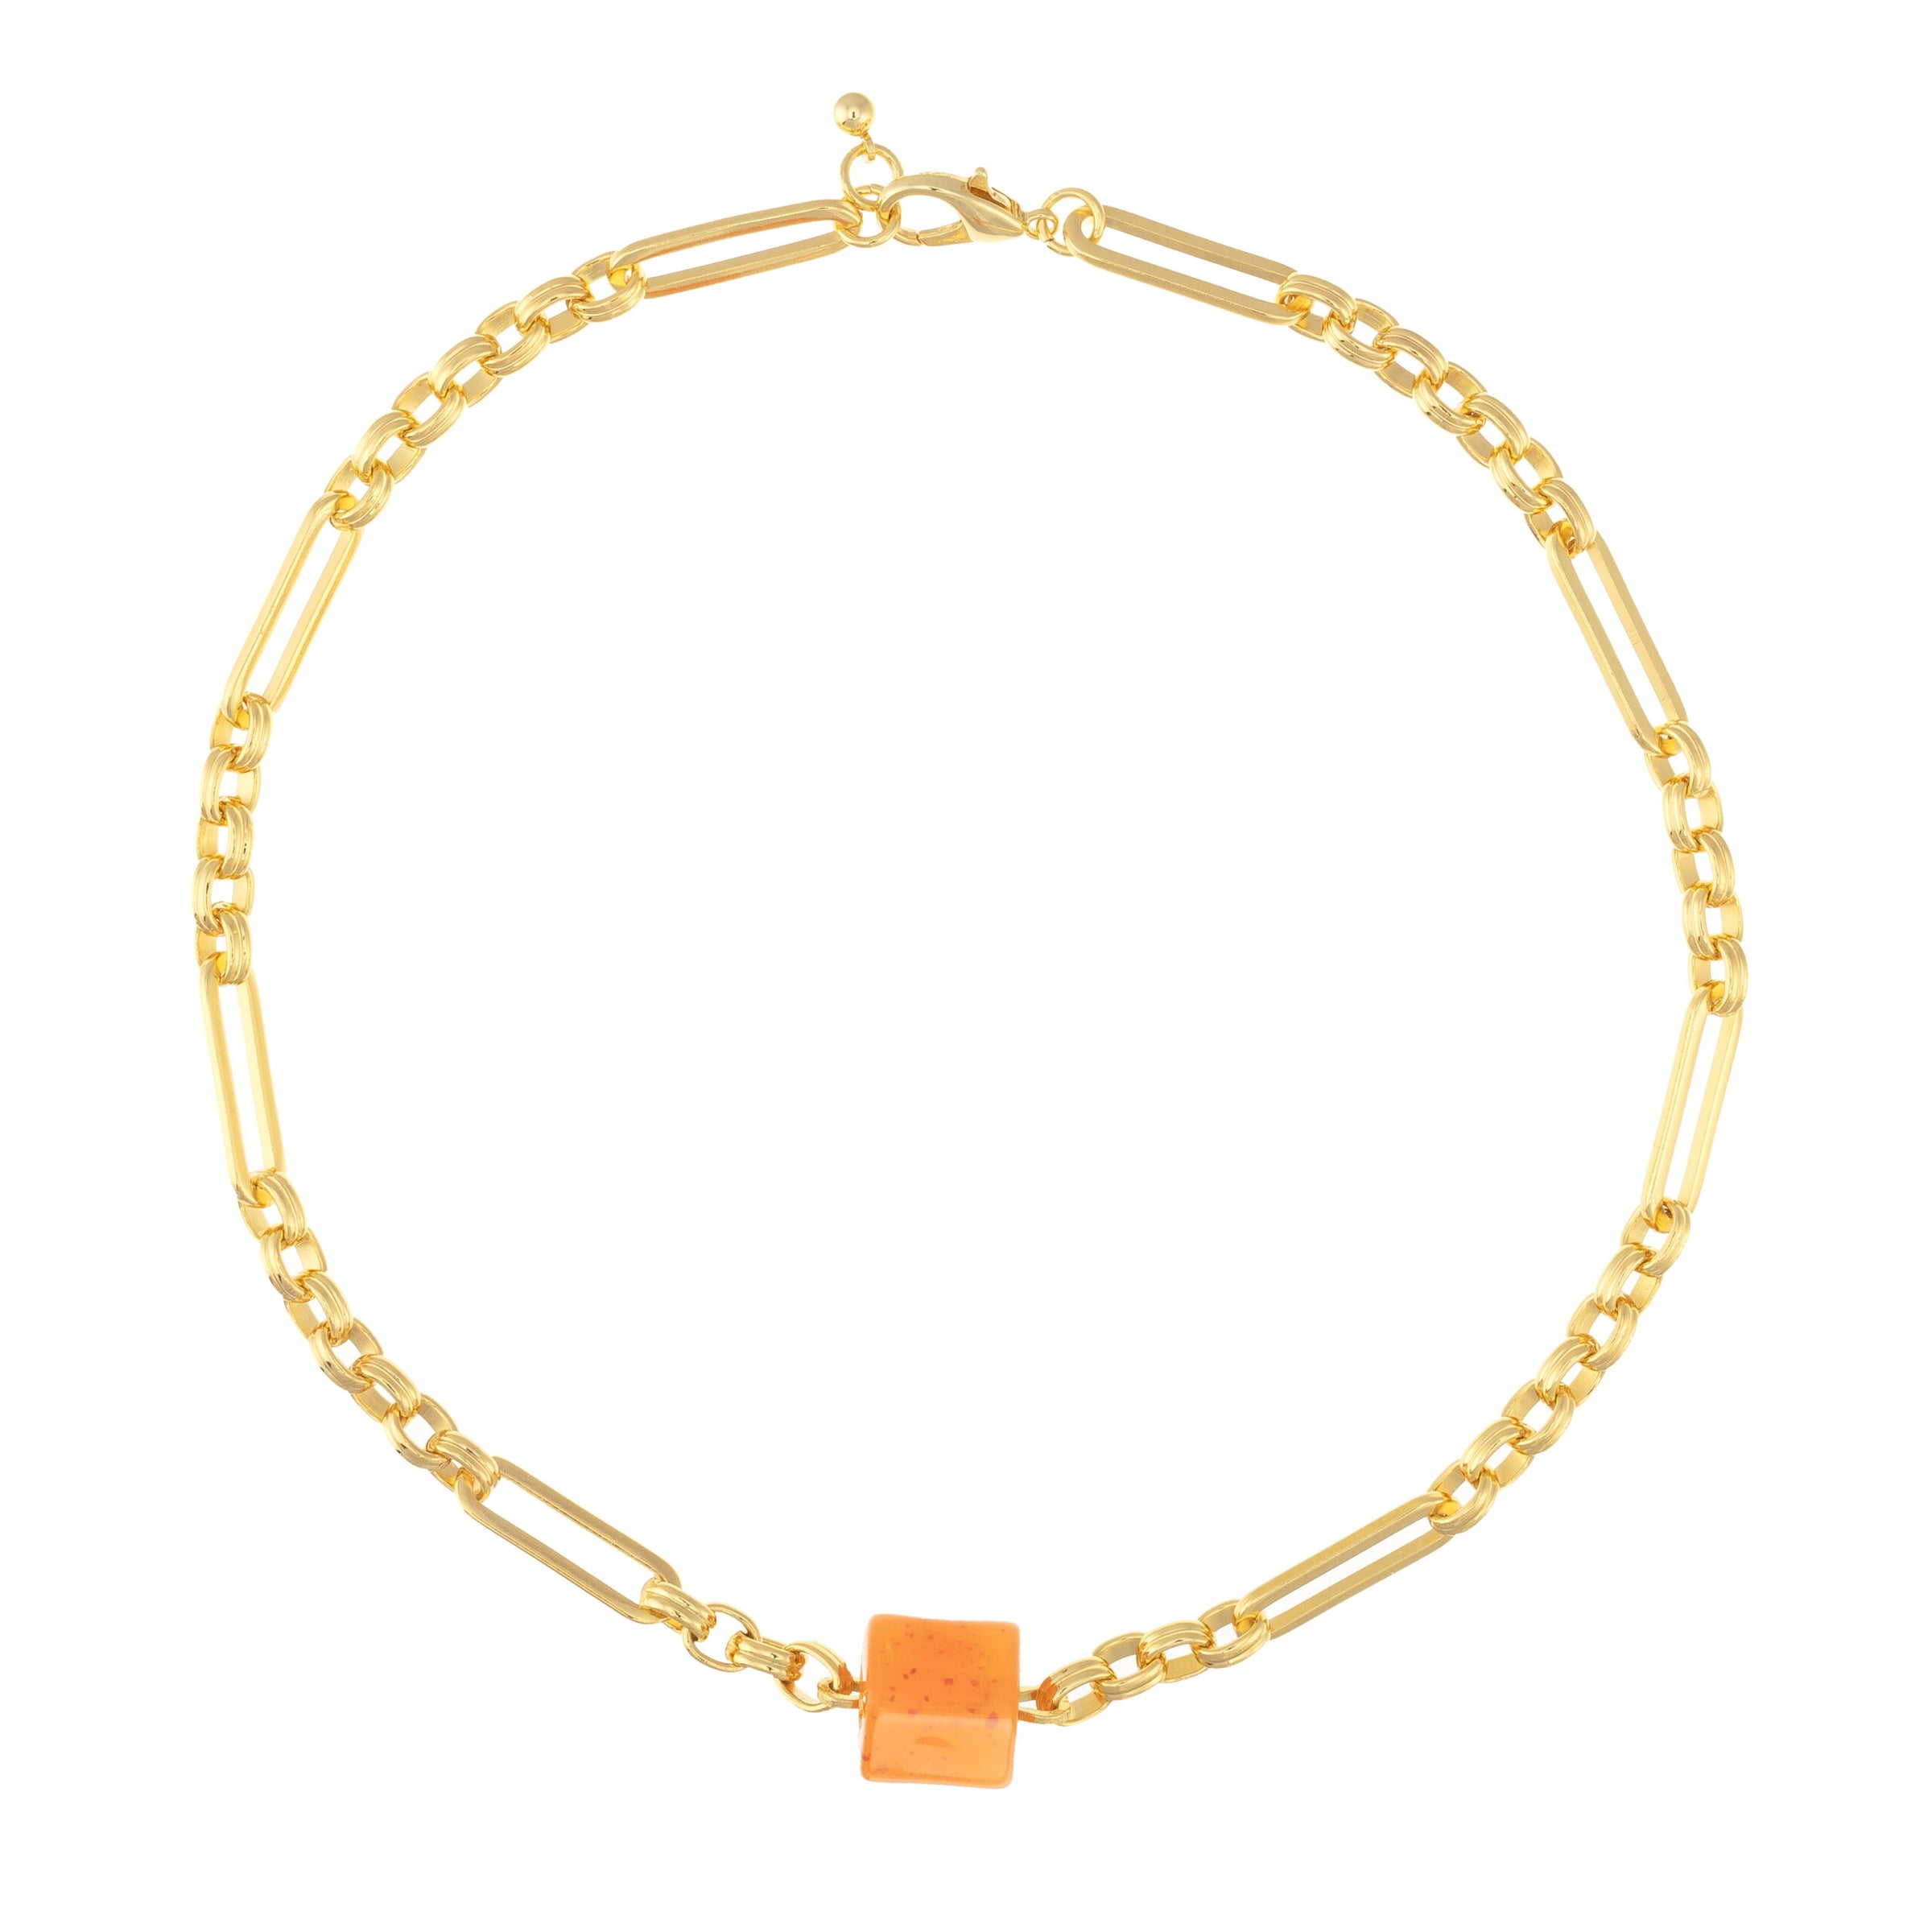 Gold chunky chain with lobster clasp and tangerine coloured cube